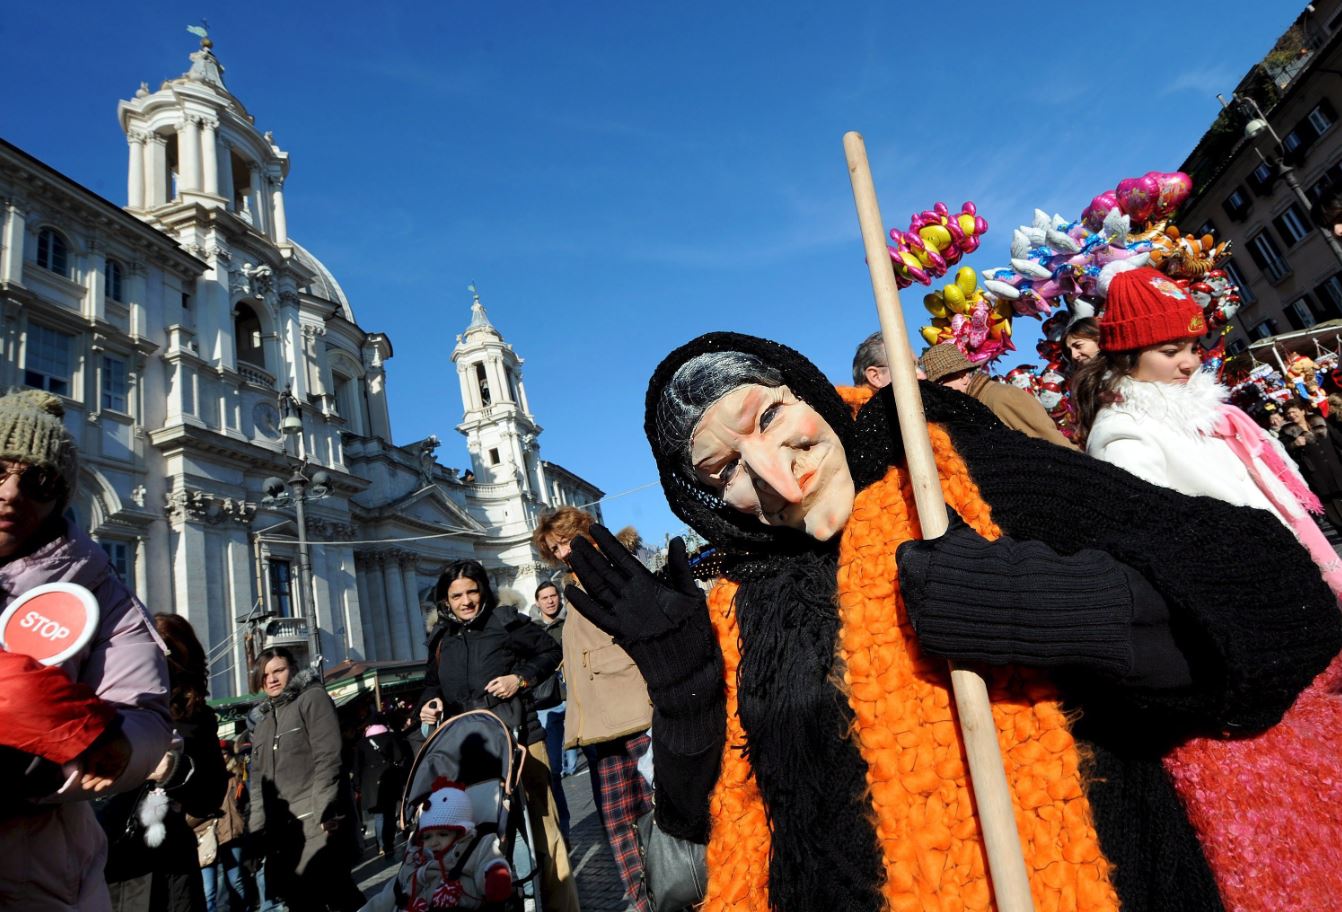 La Befana (the Christmas witch) - Life in Italy